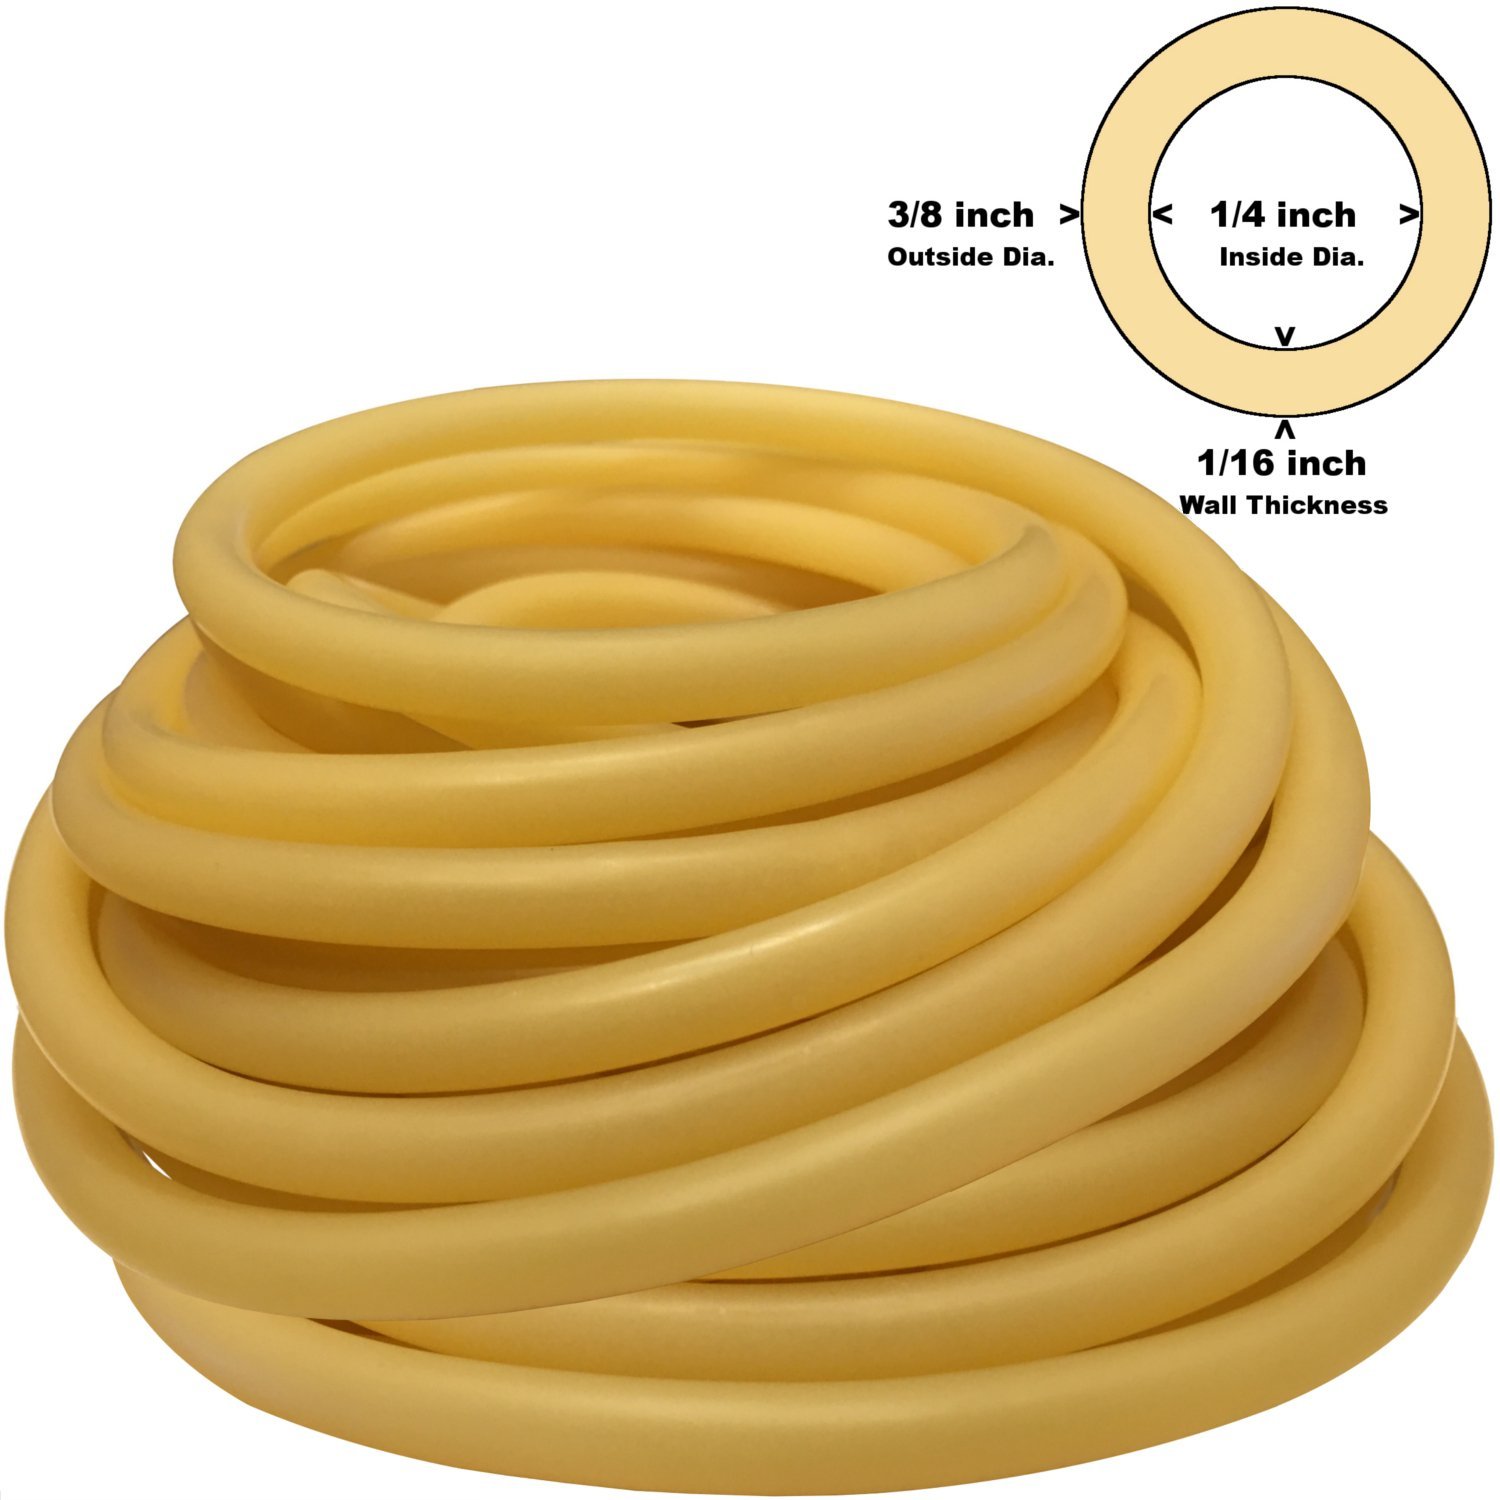 Amazon.com : 3/8in OD 1/4in ID AMBER Latex Rubber Tubing ONE ...